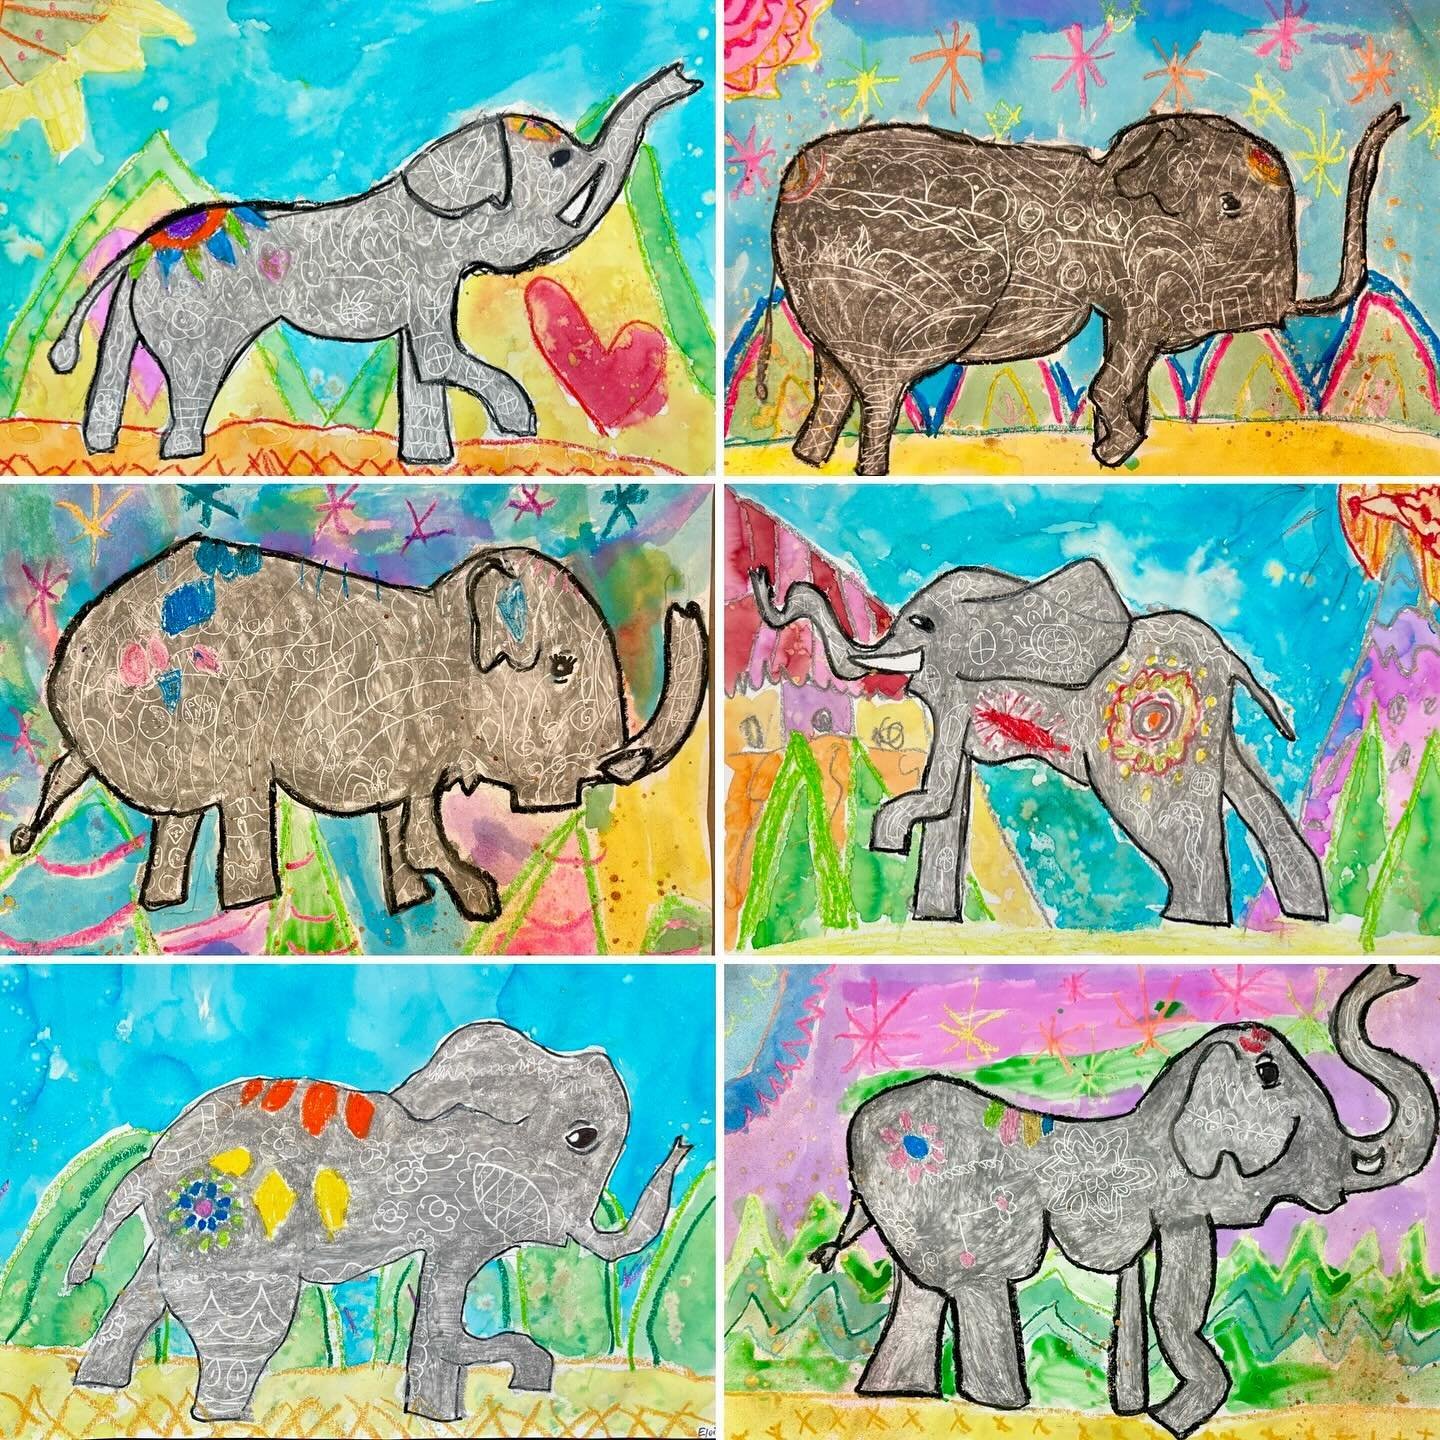 This week, our Saturday #Drawingclass and Wednesday #ArtExplorations class were inspired by the colours and patterns of #paintedelephants . In South Asia, elephants have a long history of being decorated with paint, garlands, and colourful fabrics. T